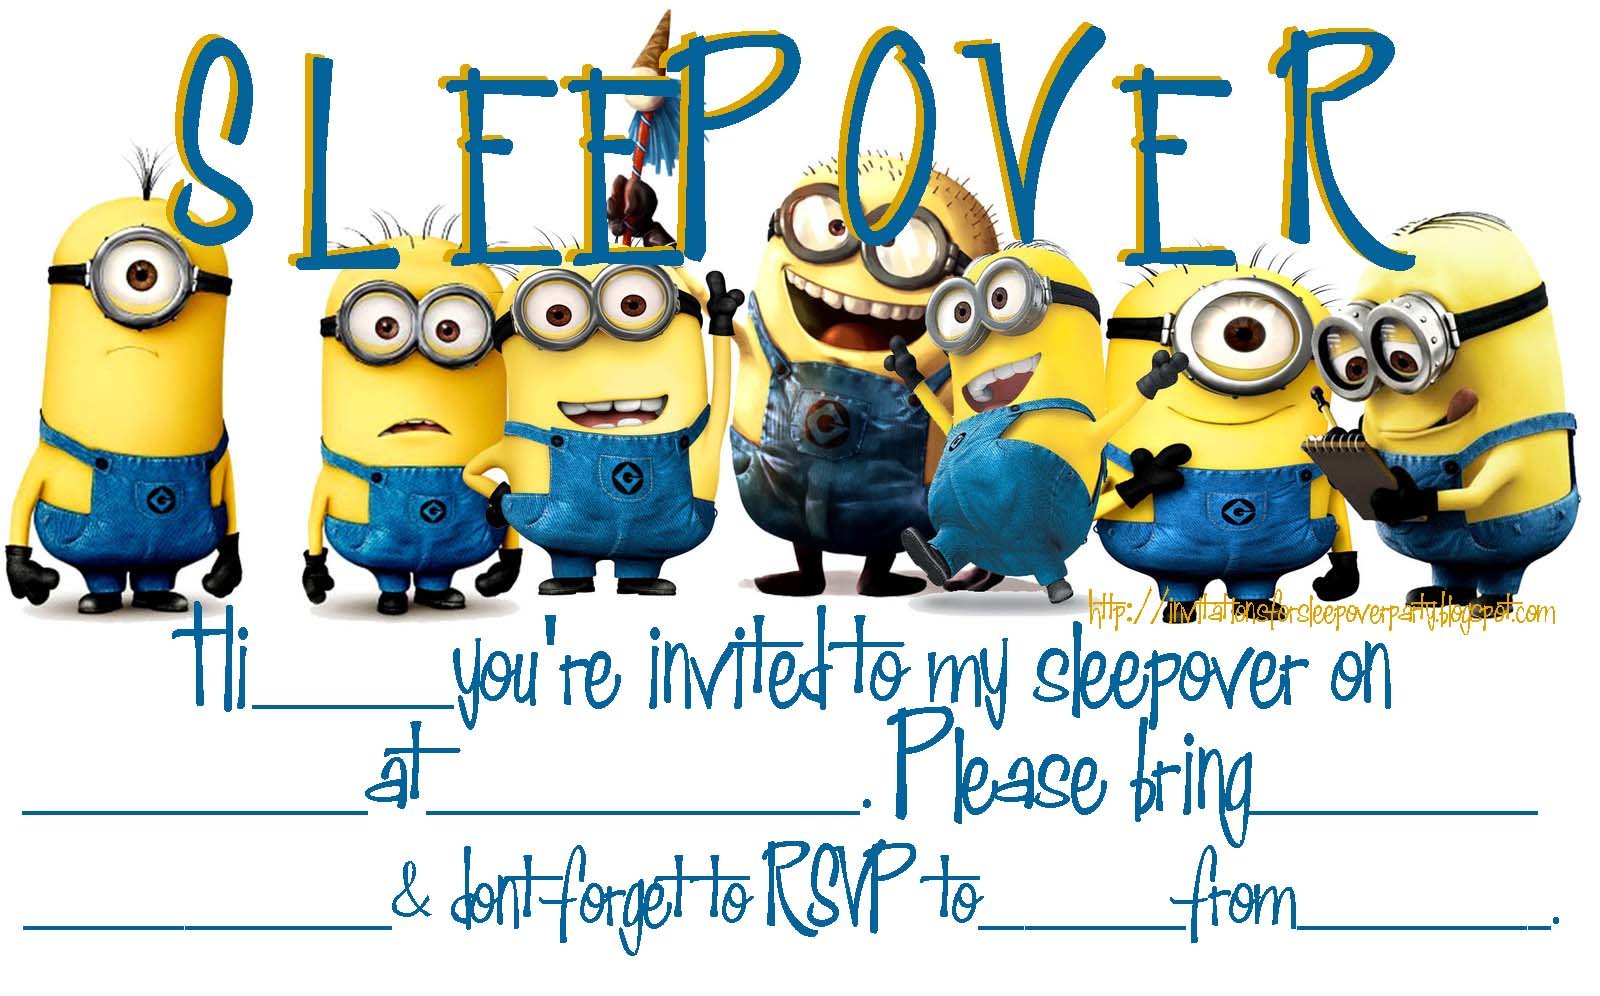 Invitations For Sleepover Party